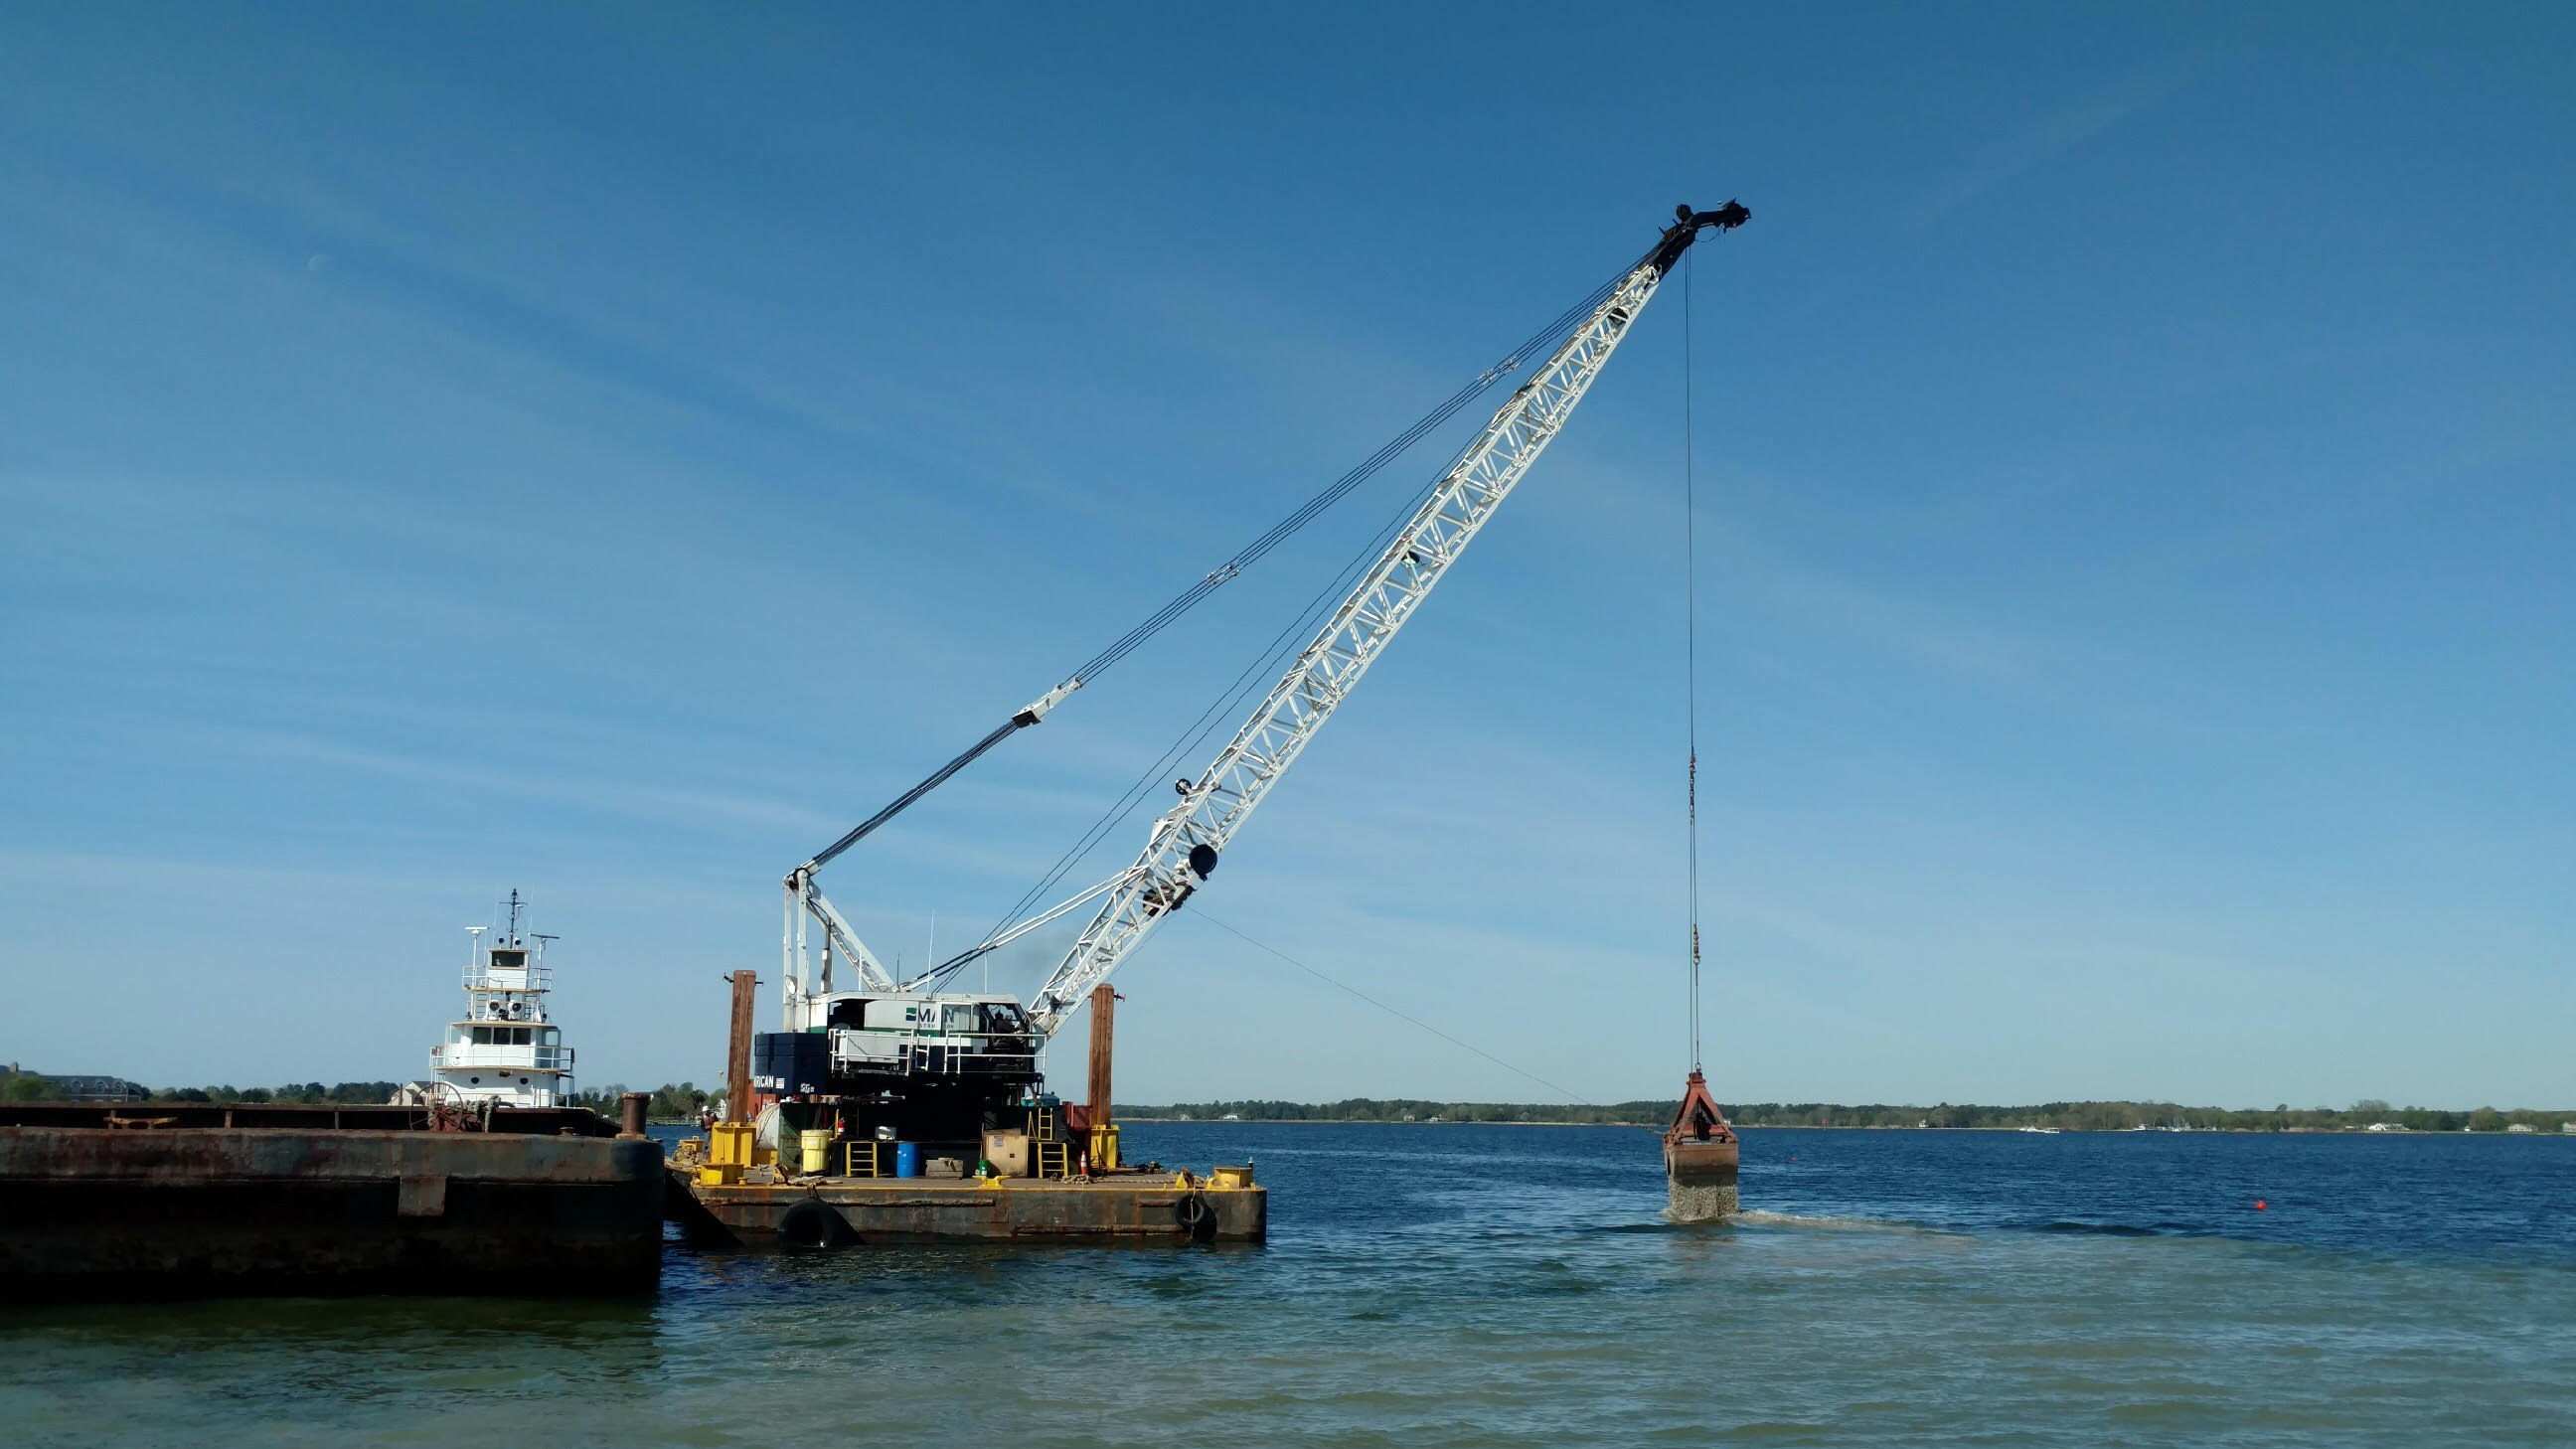 The U.S. Army Corps of Engineers, Baltimore District, places mixed shell to restore oyster reefs in the Tred Avon River sanctuary, April 18, 2017. (U.S. Army photo by Sean Fritzges) (Photo by Sean Fritzges)